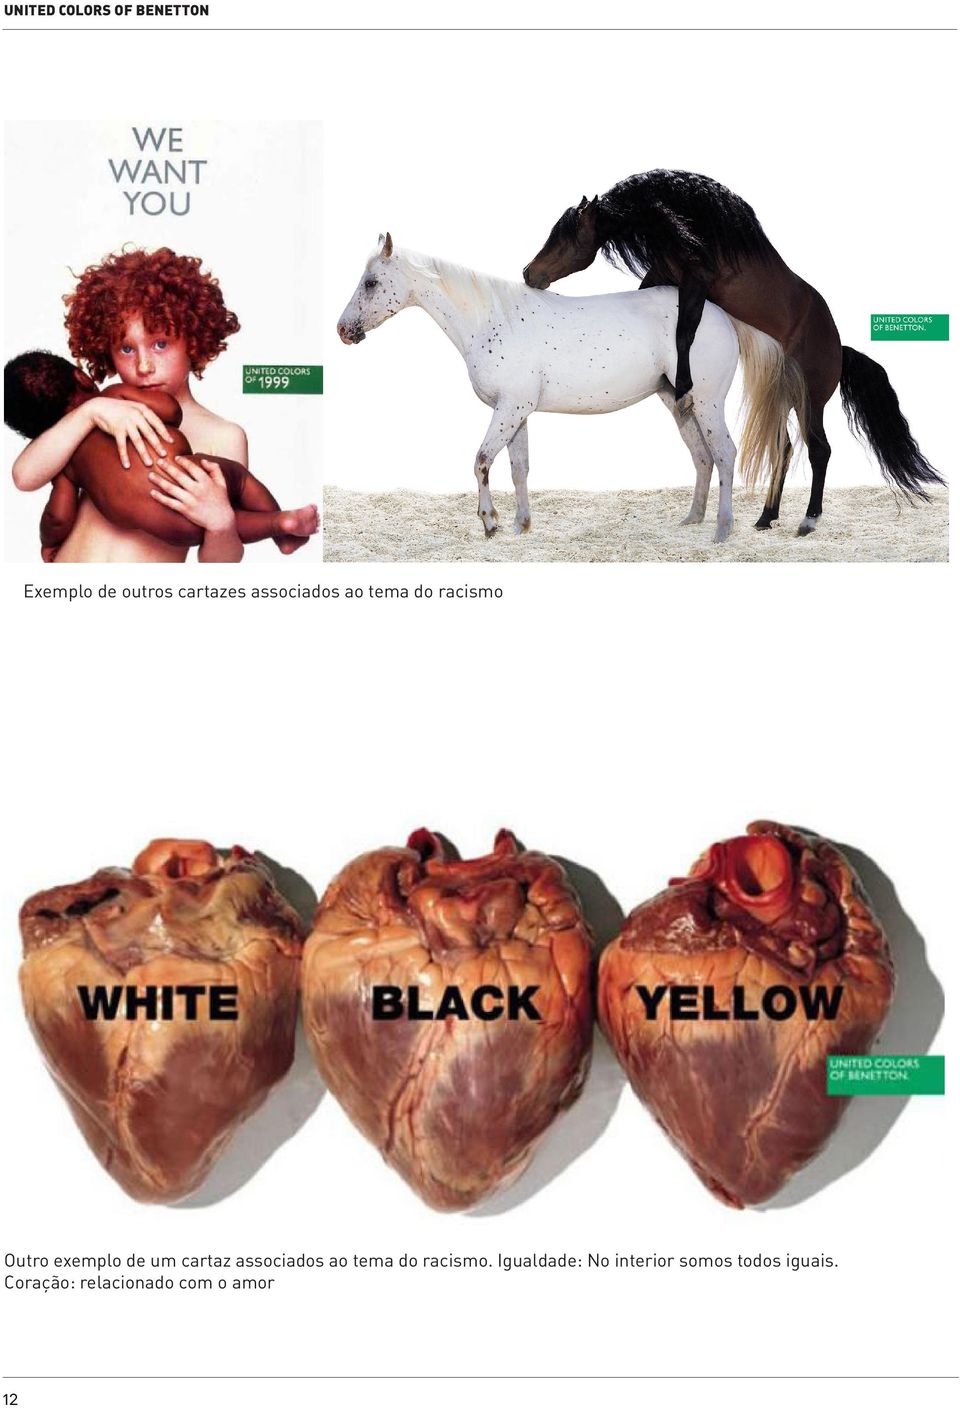 United Colors of Benetton - PDF Free Download